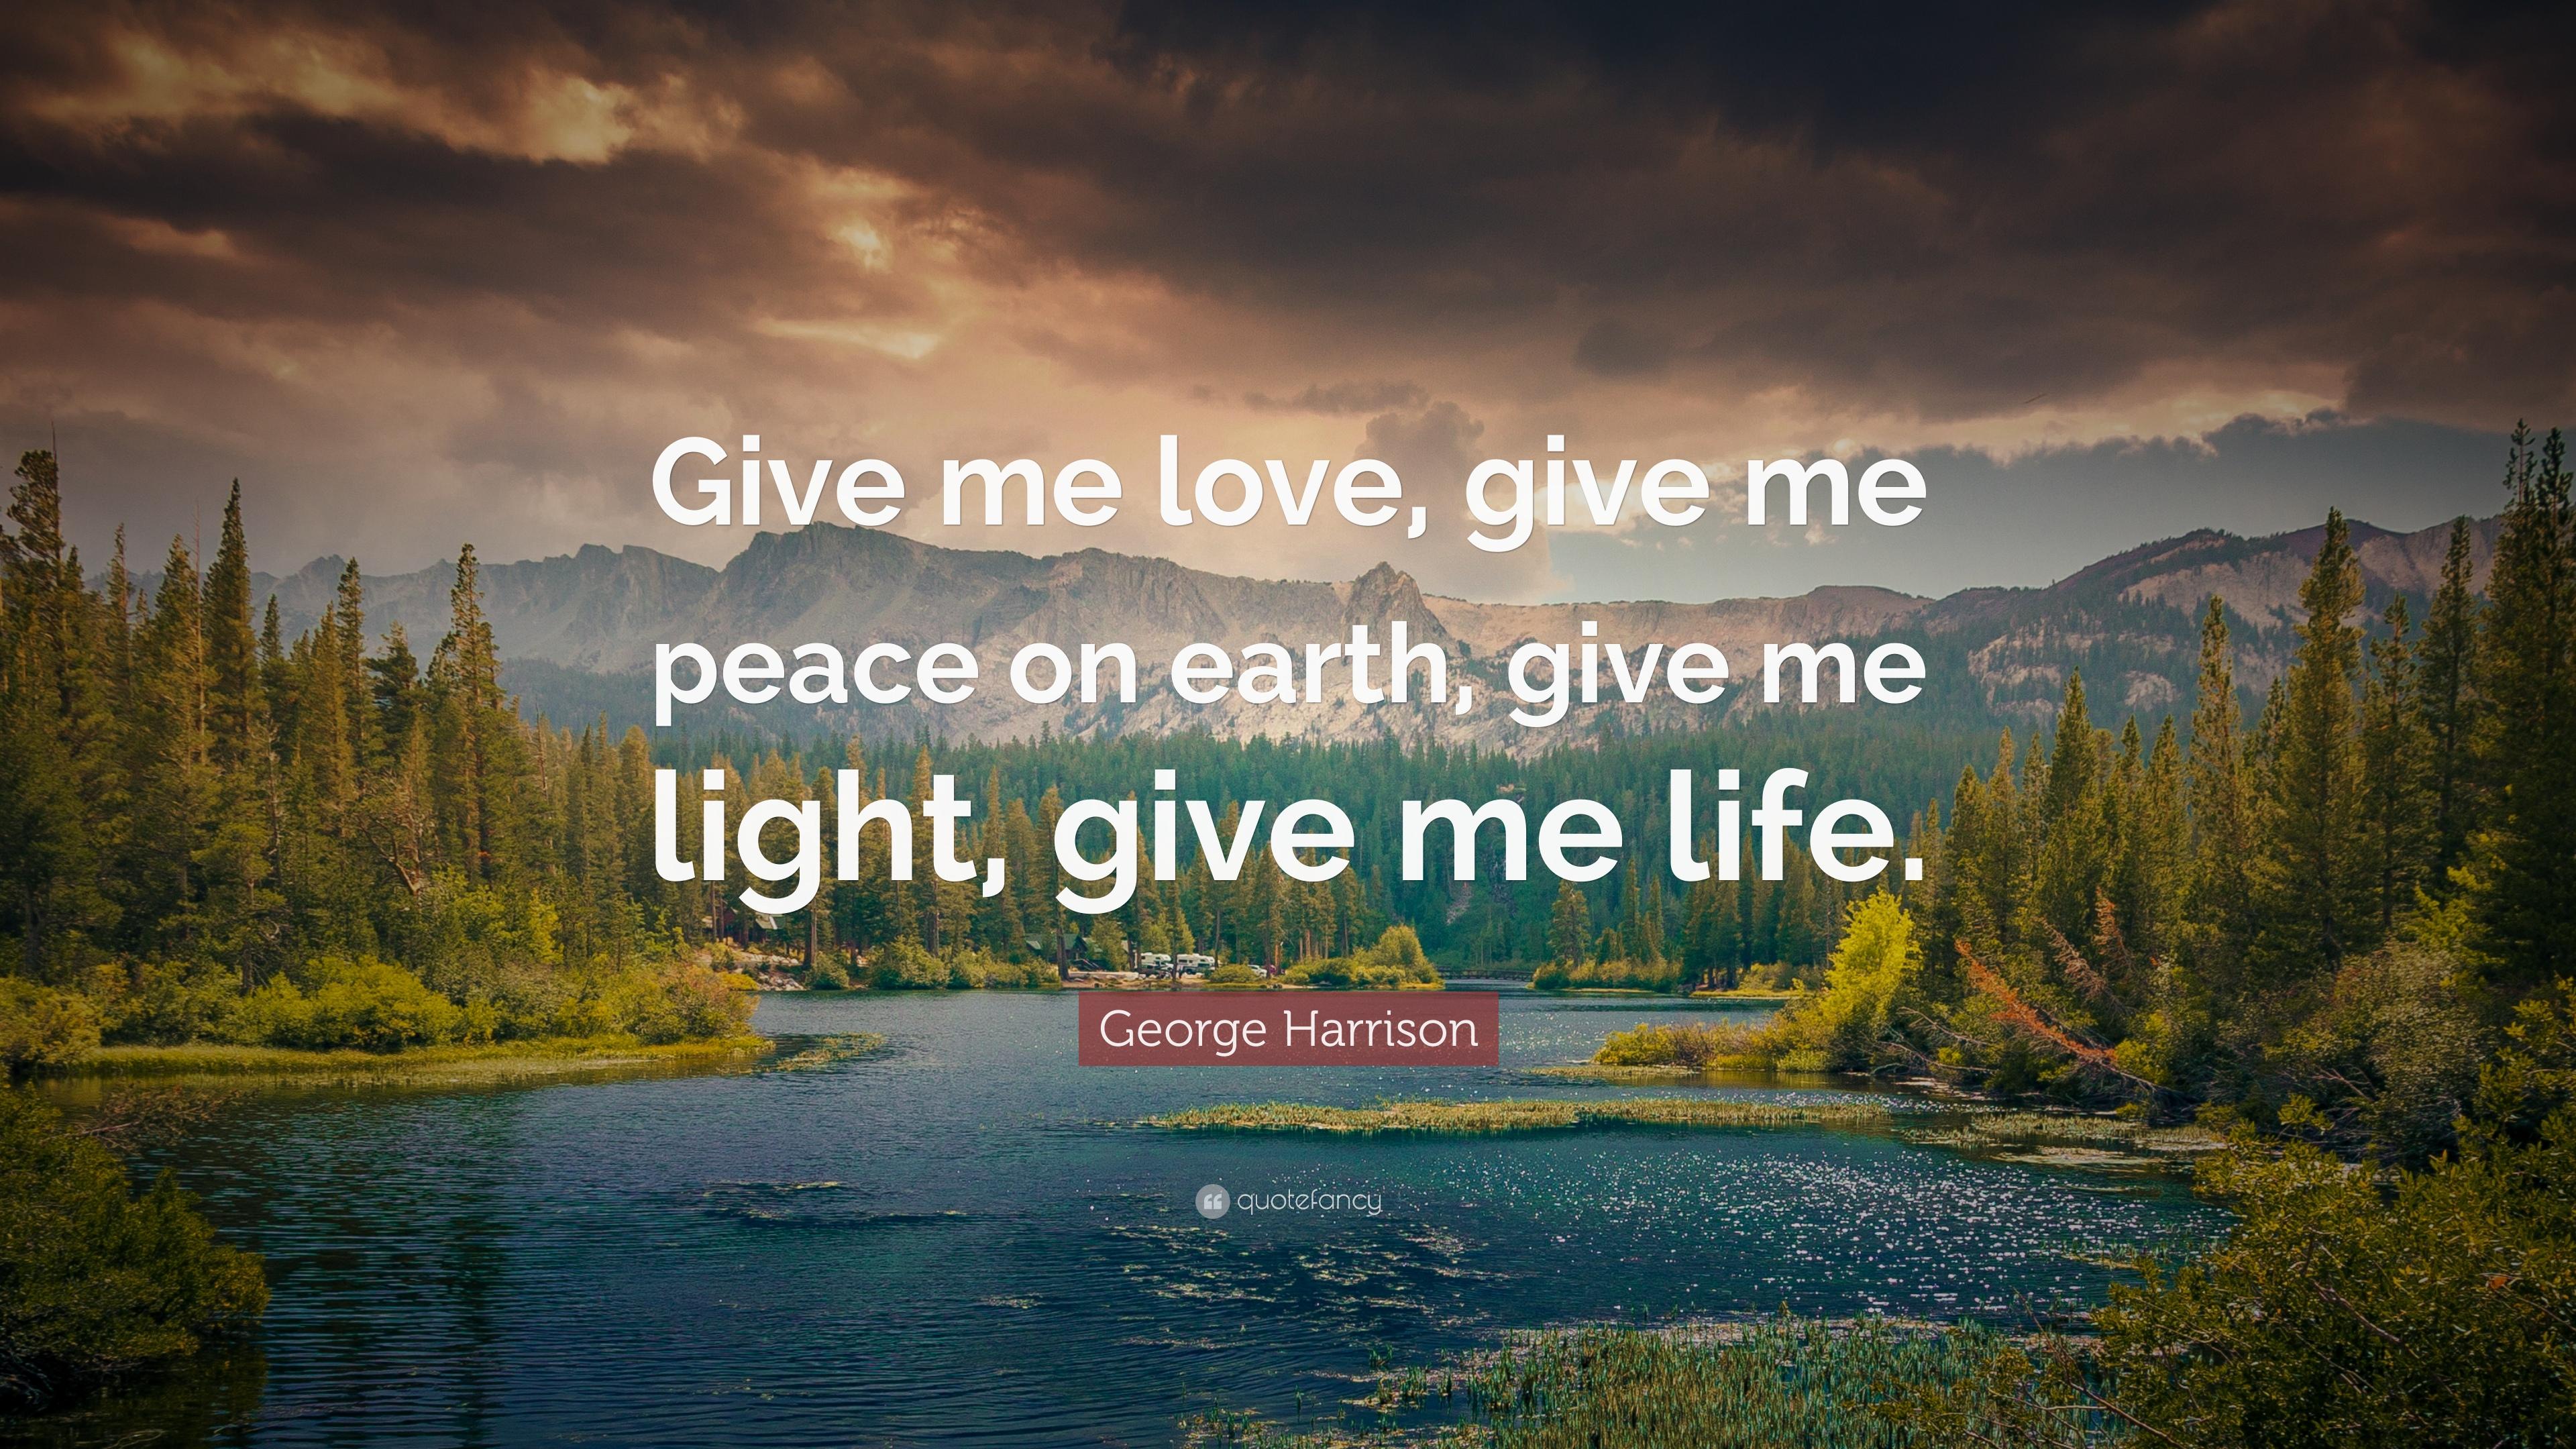 George Harrison Quote: “Give me love, give me peace on earth